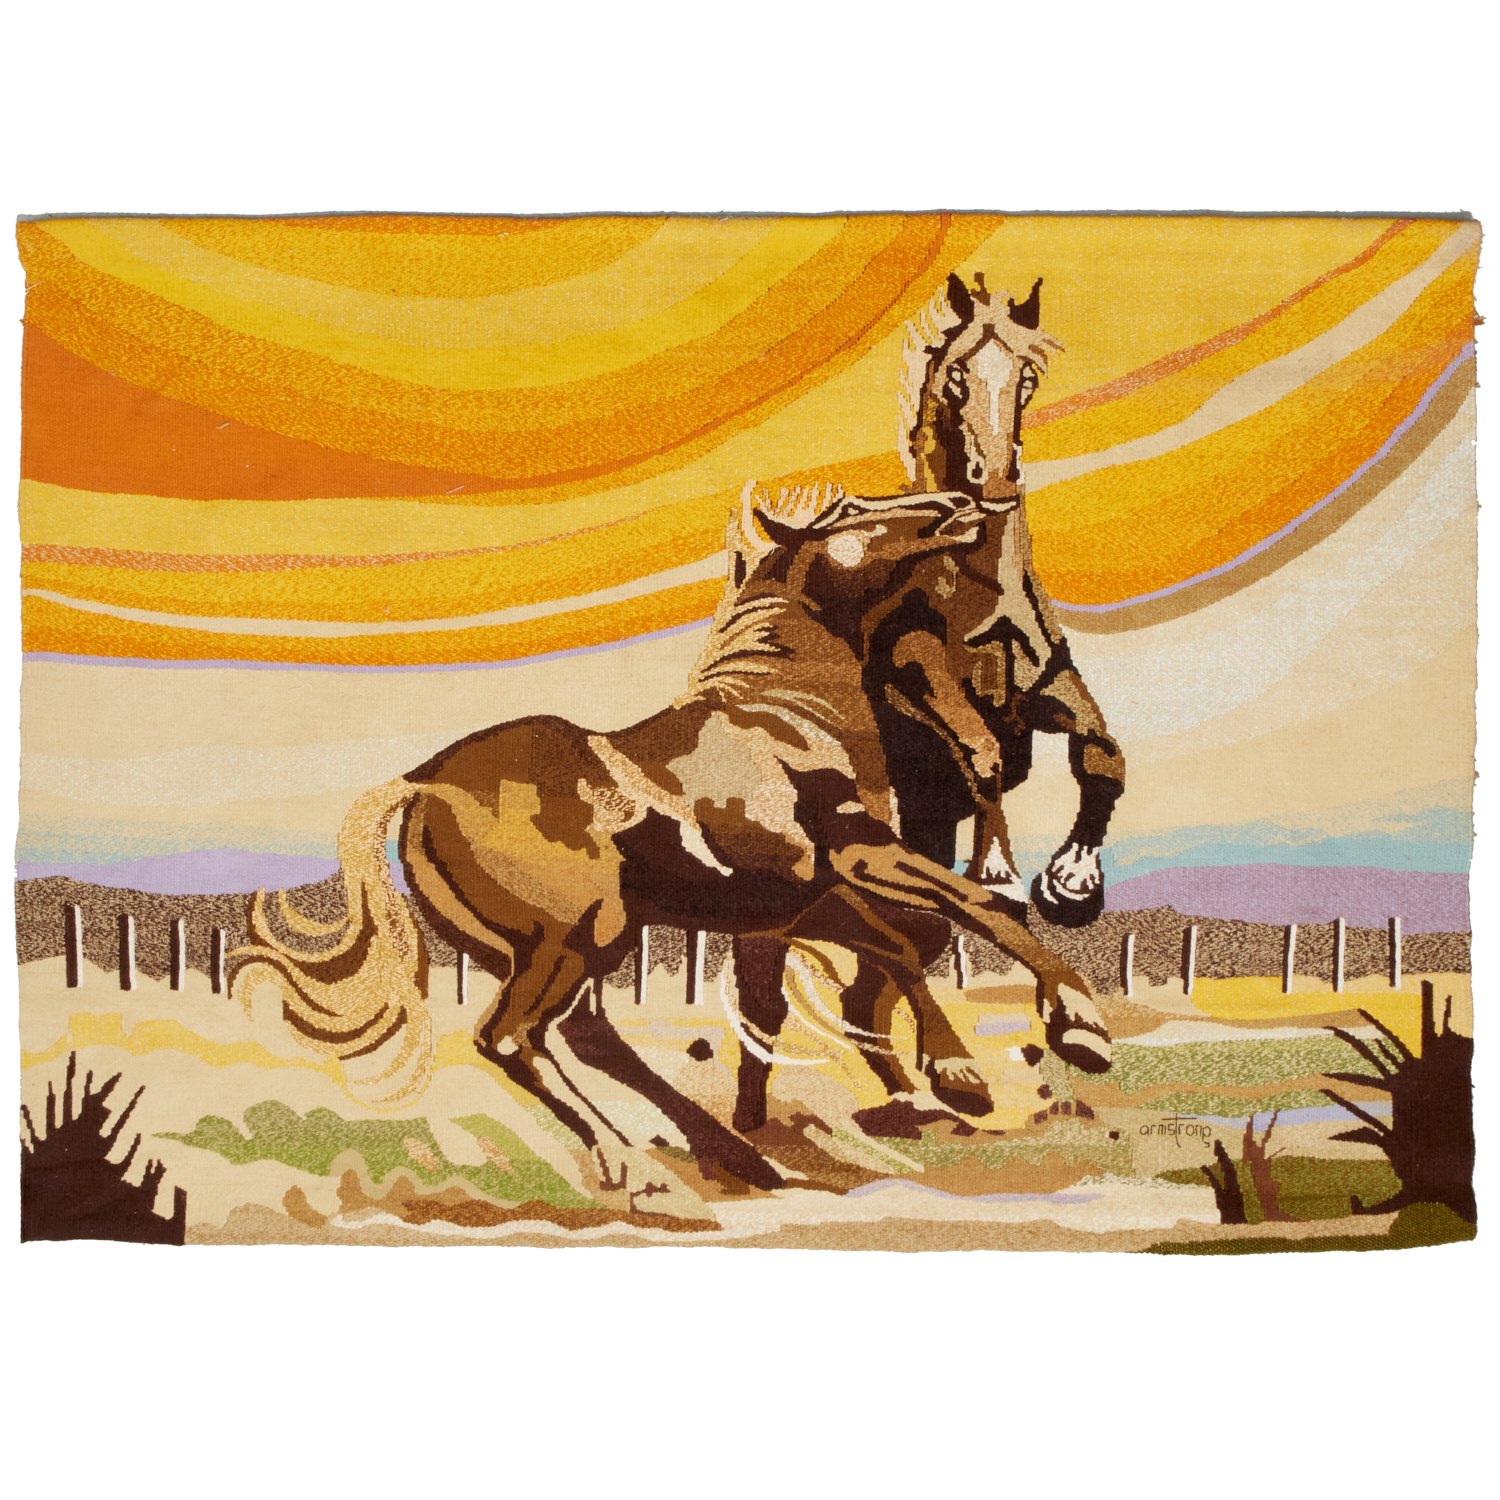 LIRA ARMSTRONG WALL TAPESTRY  2fb32c